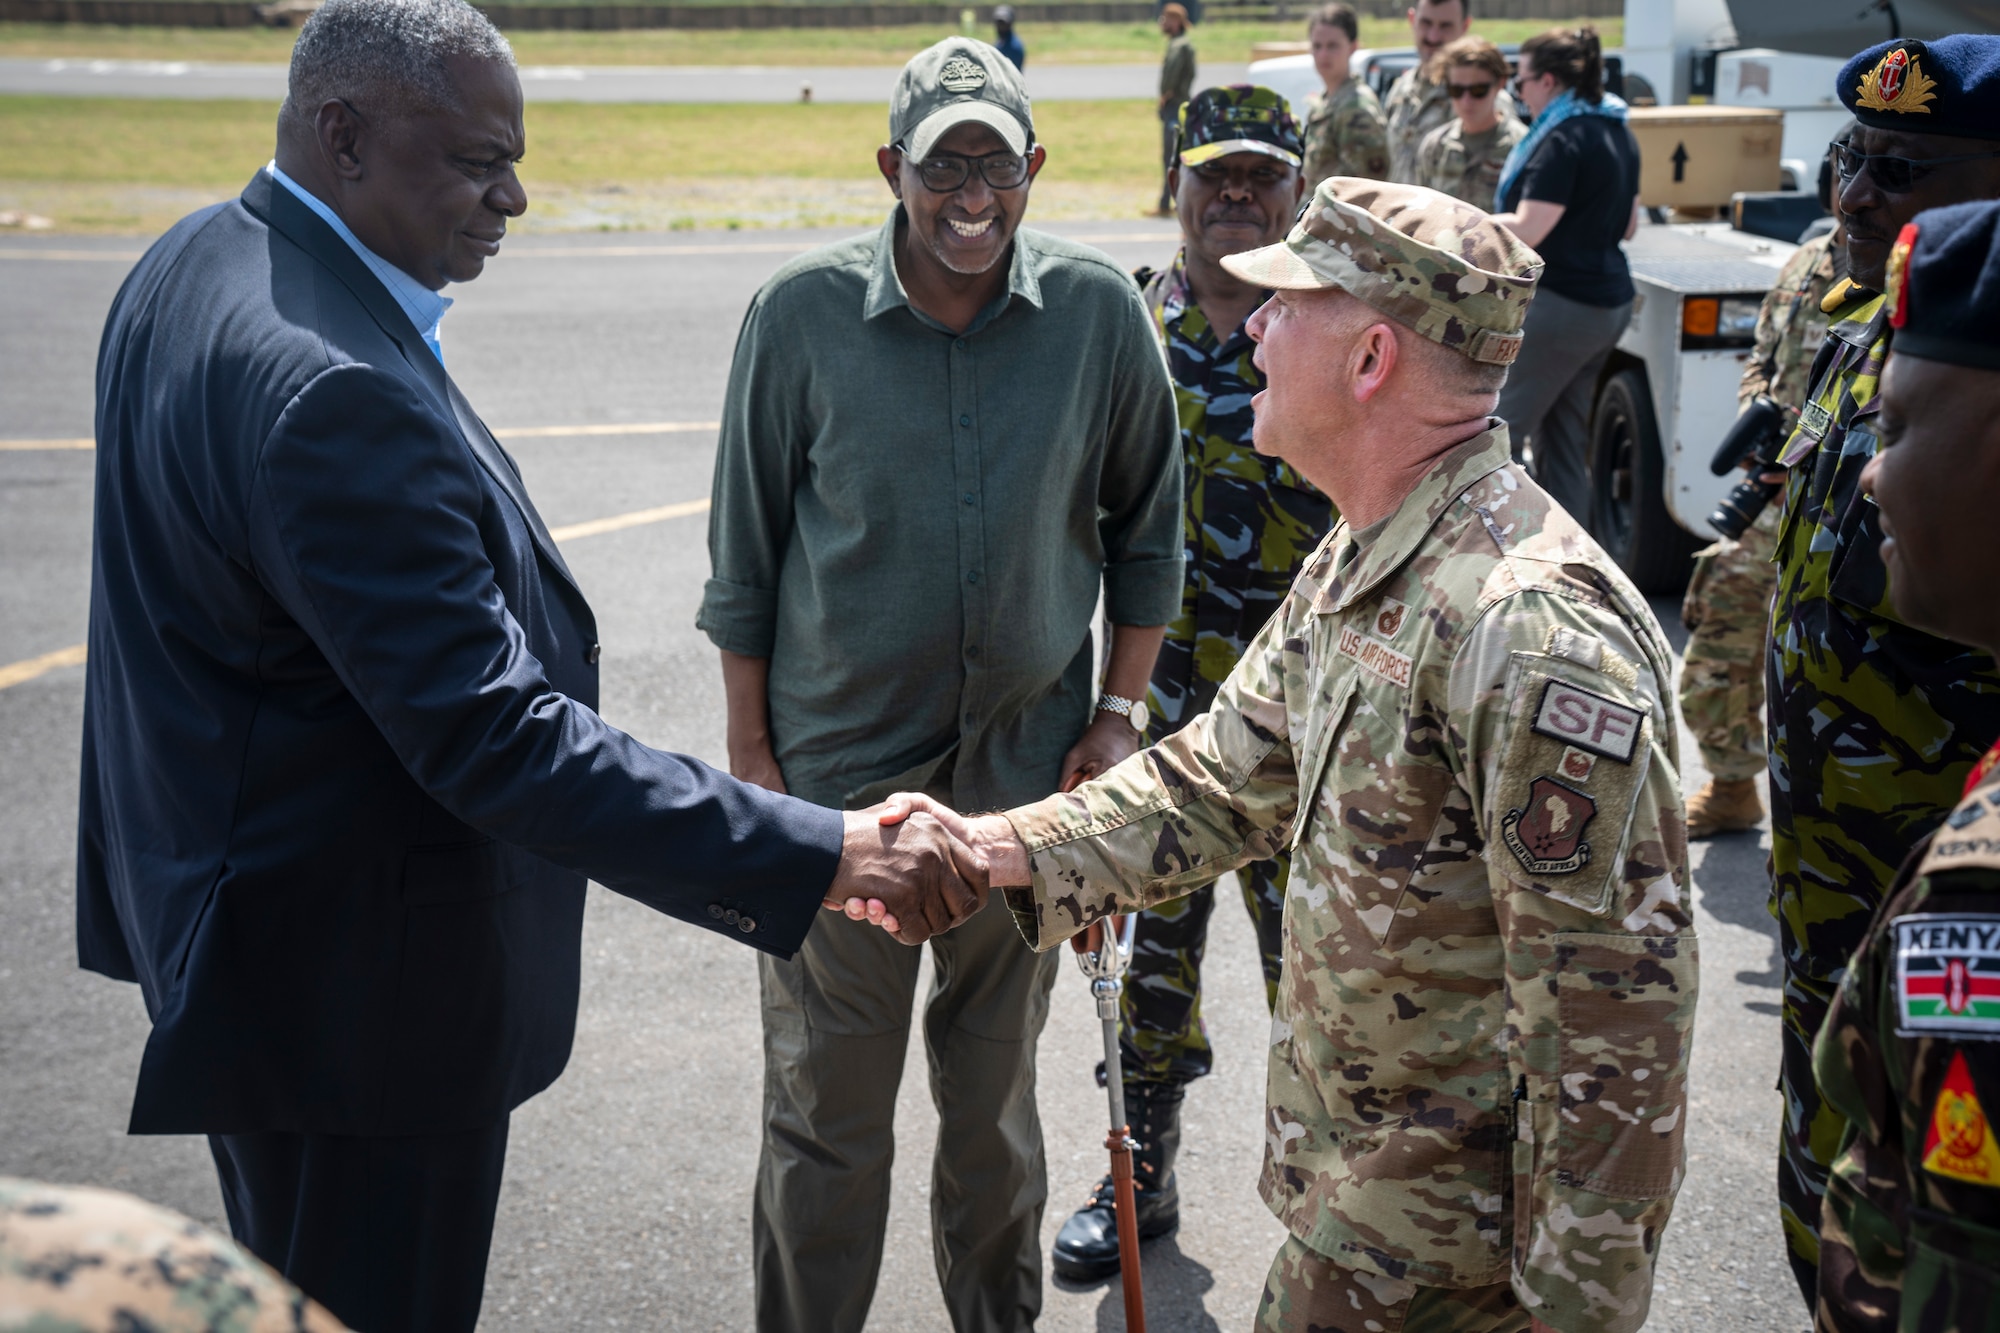 U.S. Secretary of Defense Lloyd J. Austin III and Kenyan Cabinet Secretary of the Ministry of Defence Aden Duale are greeted by U.S. Air Force Lt. Col. John Farmer, 475th Expeditionary Air Base Squadron commander